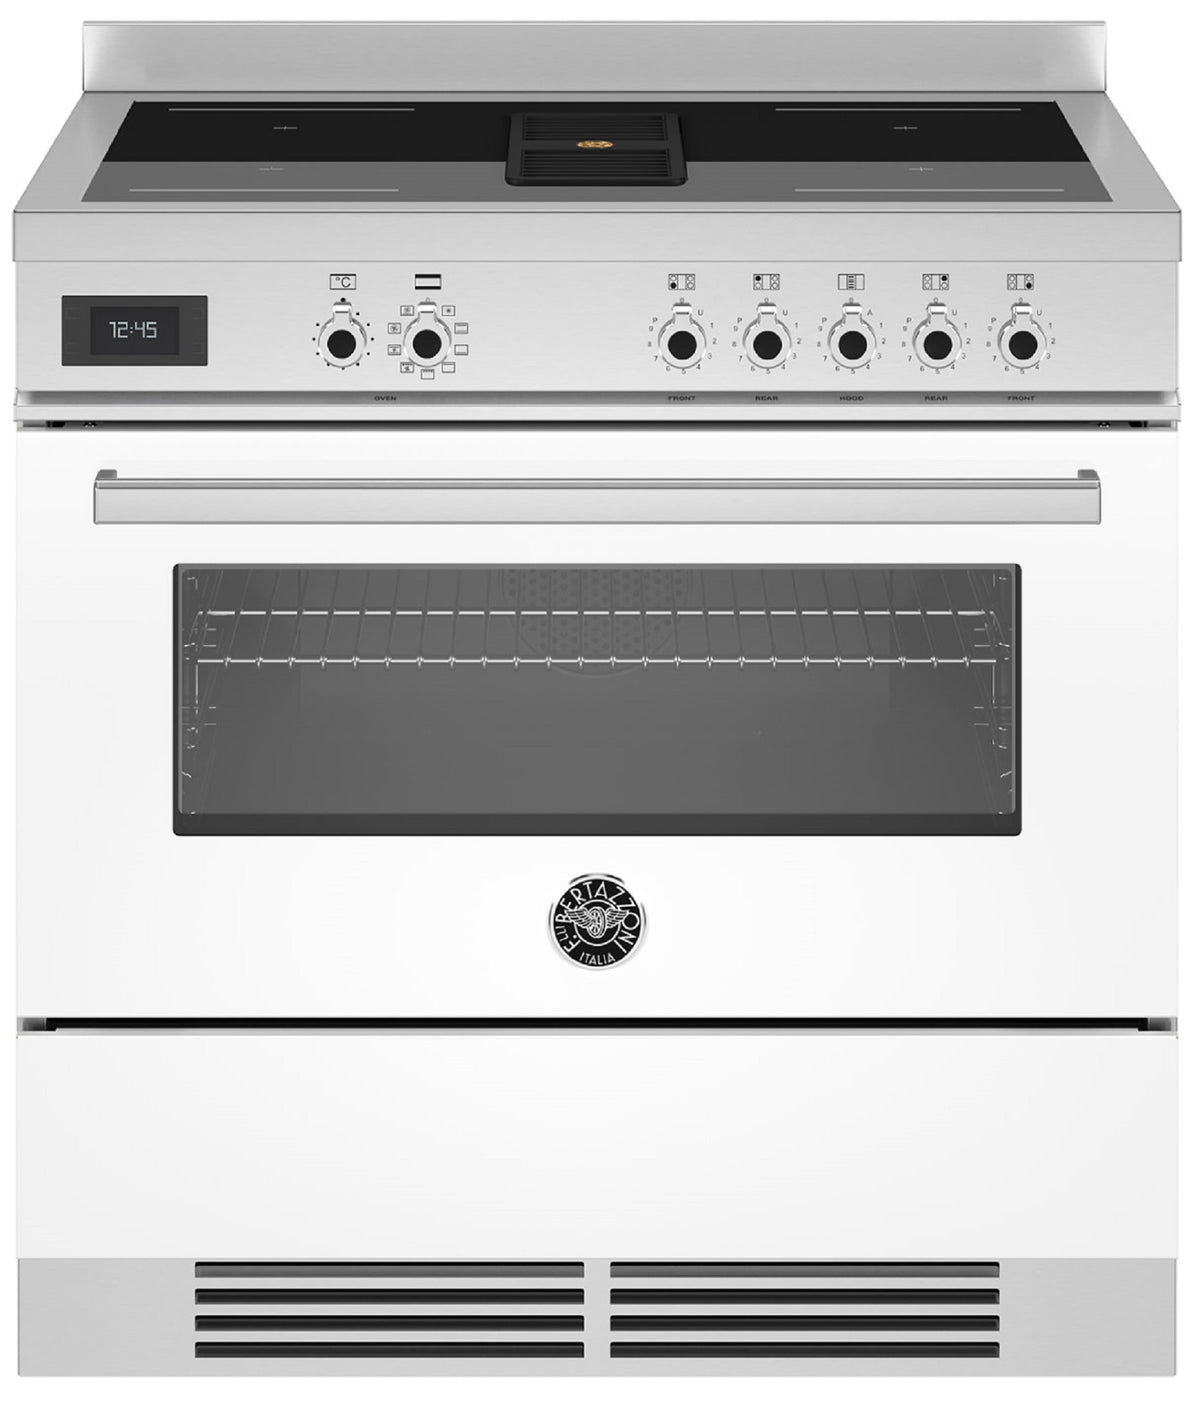 BERTAZZONI PROCH94I1EBIT 90cm Electric Oven 5 Zone Induction Hob with in-built Extractor Range Cooker in White